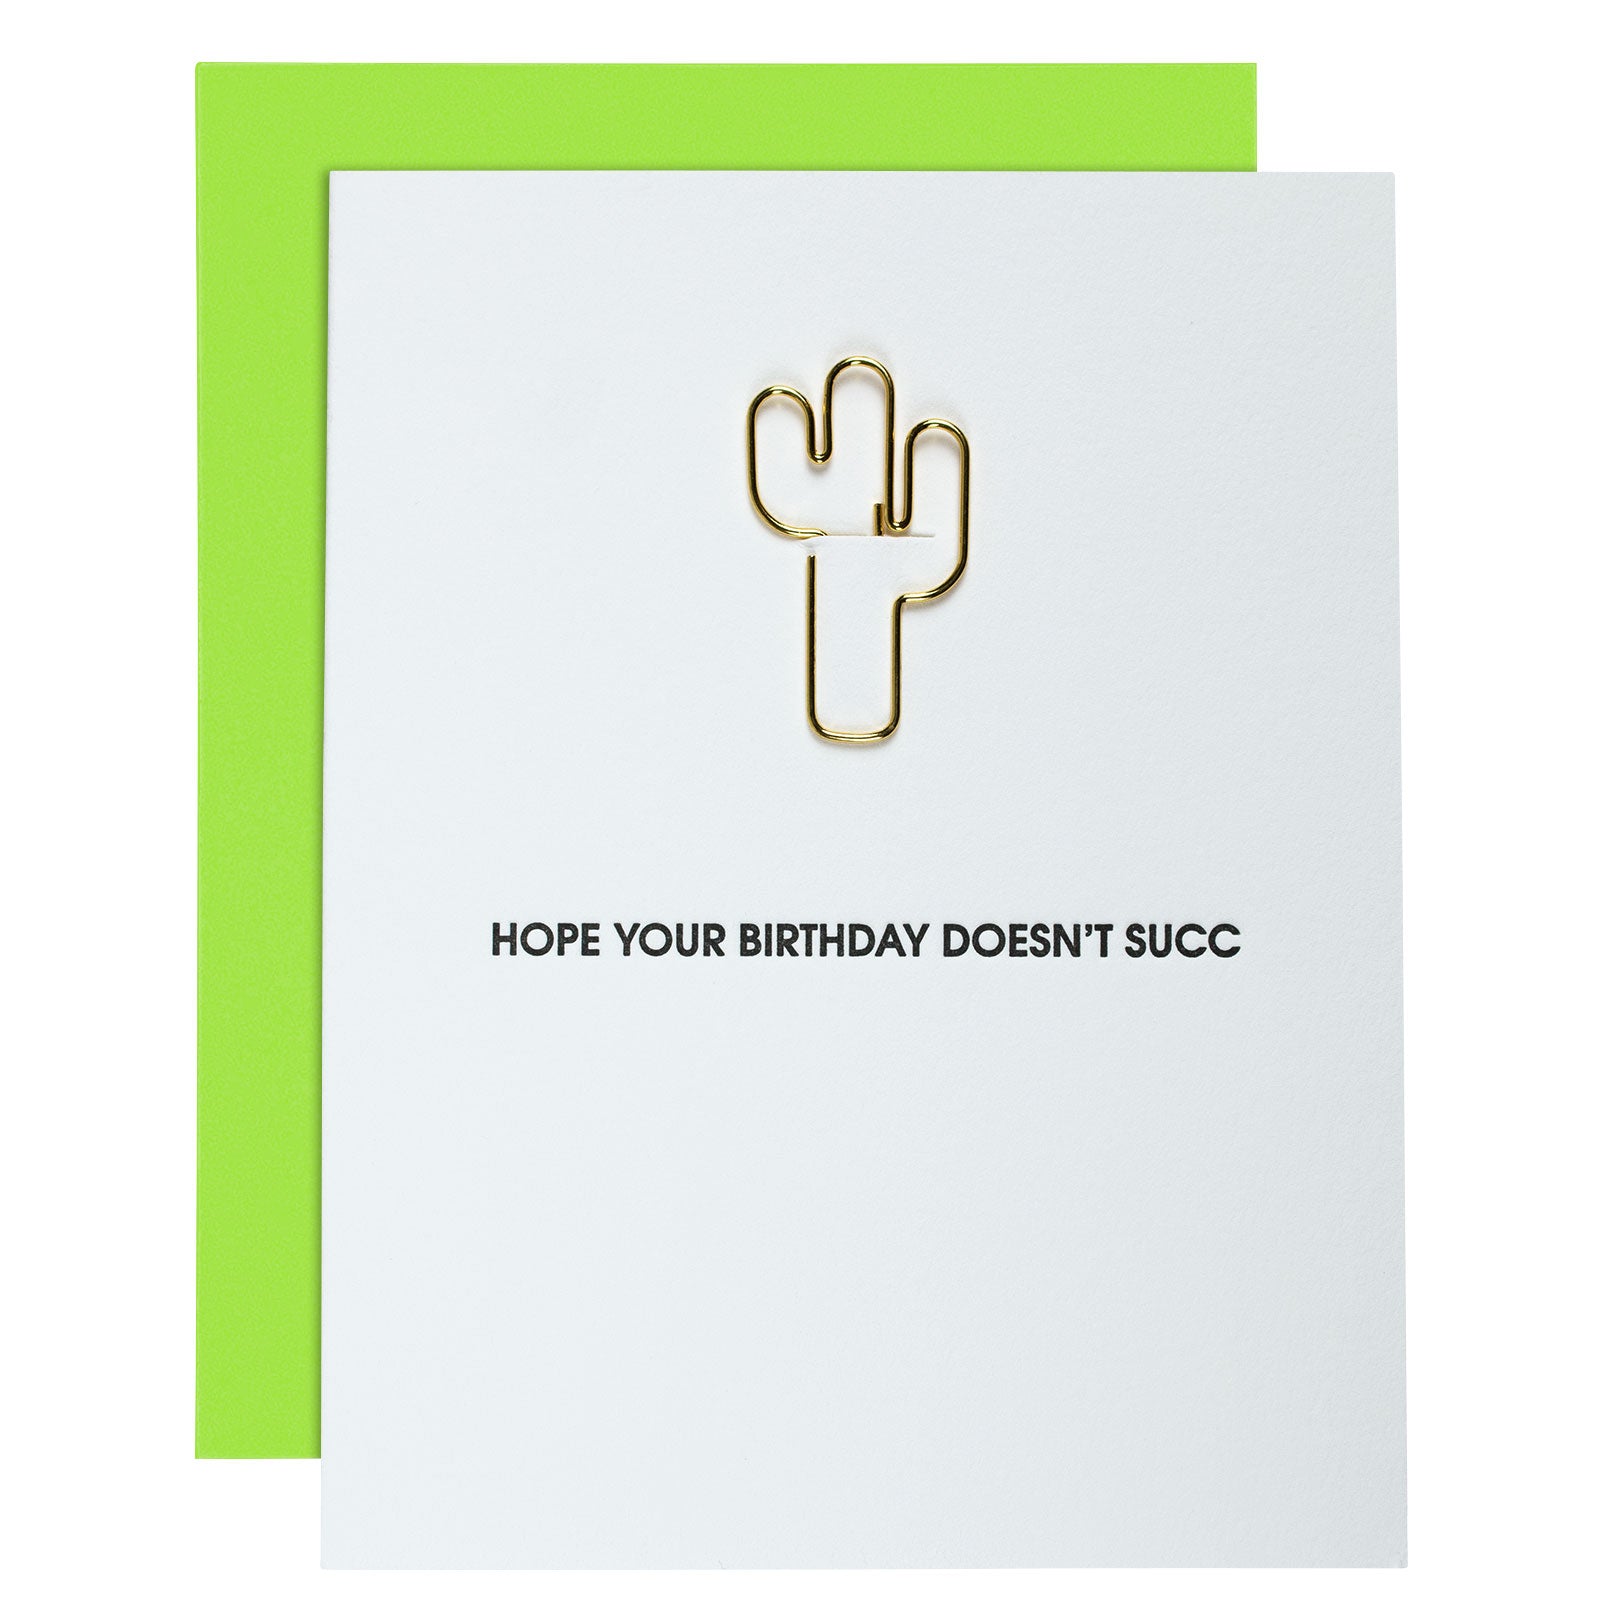 Hope Your Birthday Doesn't Succ - Paper Clip Letterpress Card